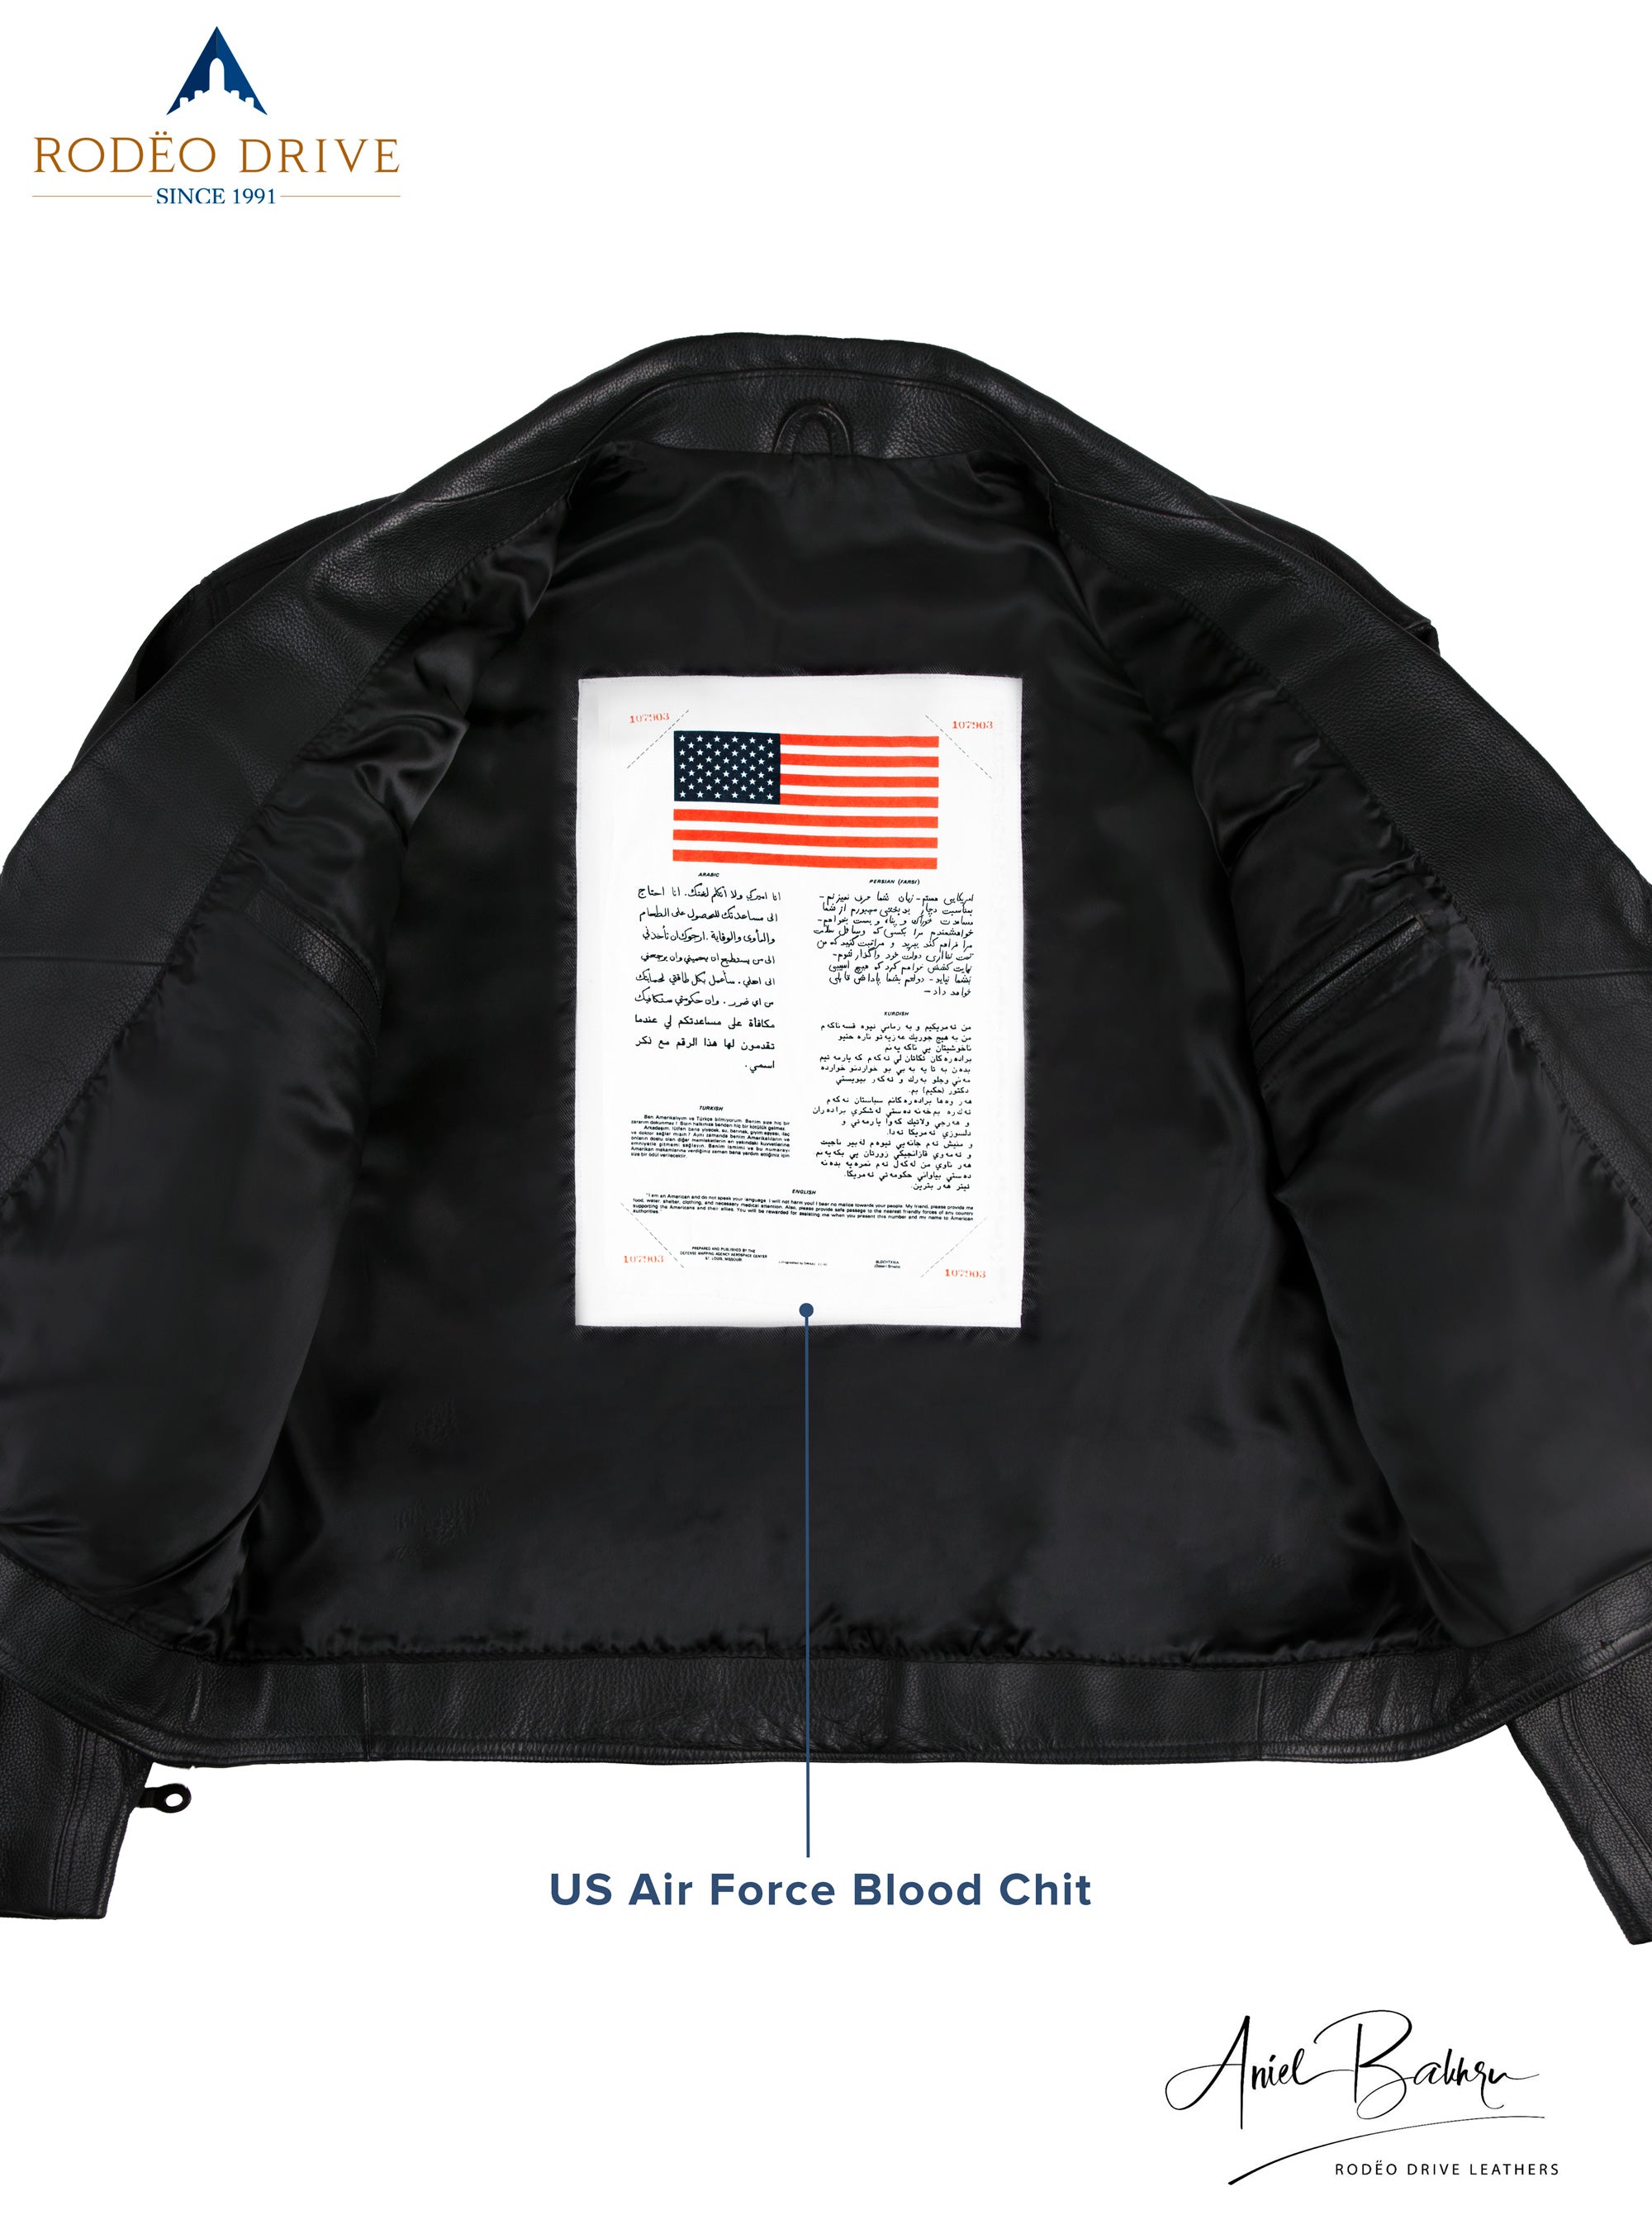 Inside image of open HARLEY JACKET. US air force Blood chit is sewed inside